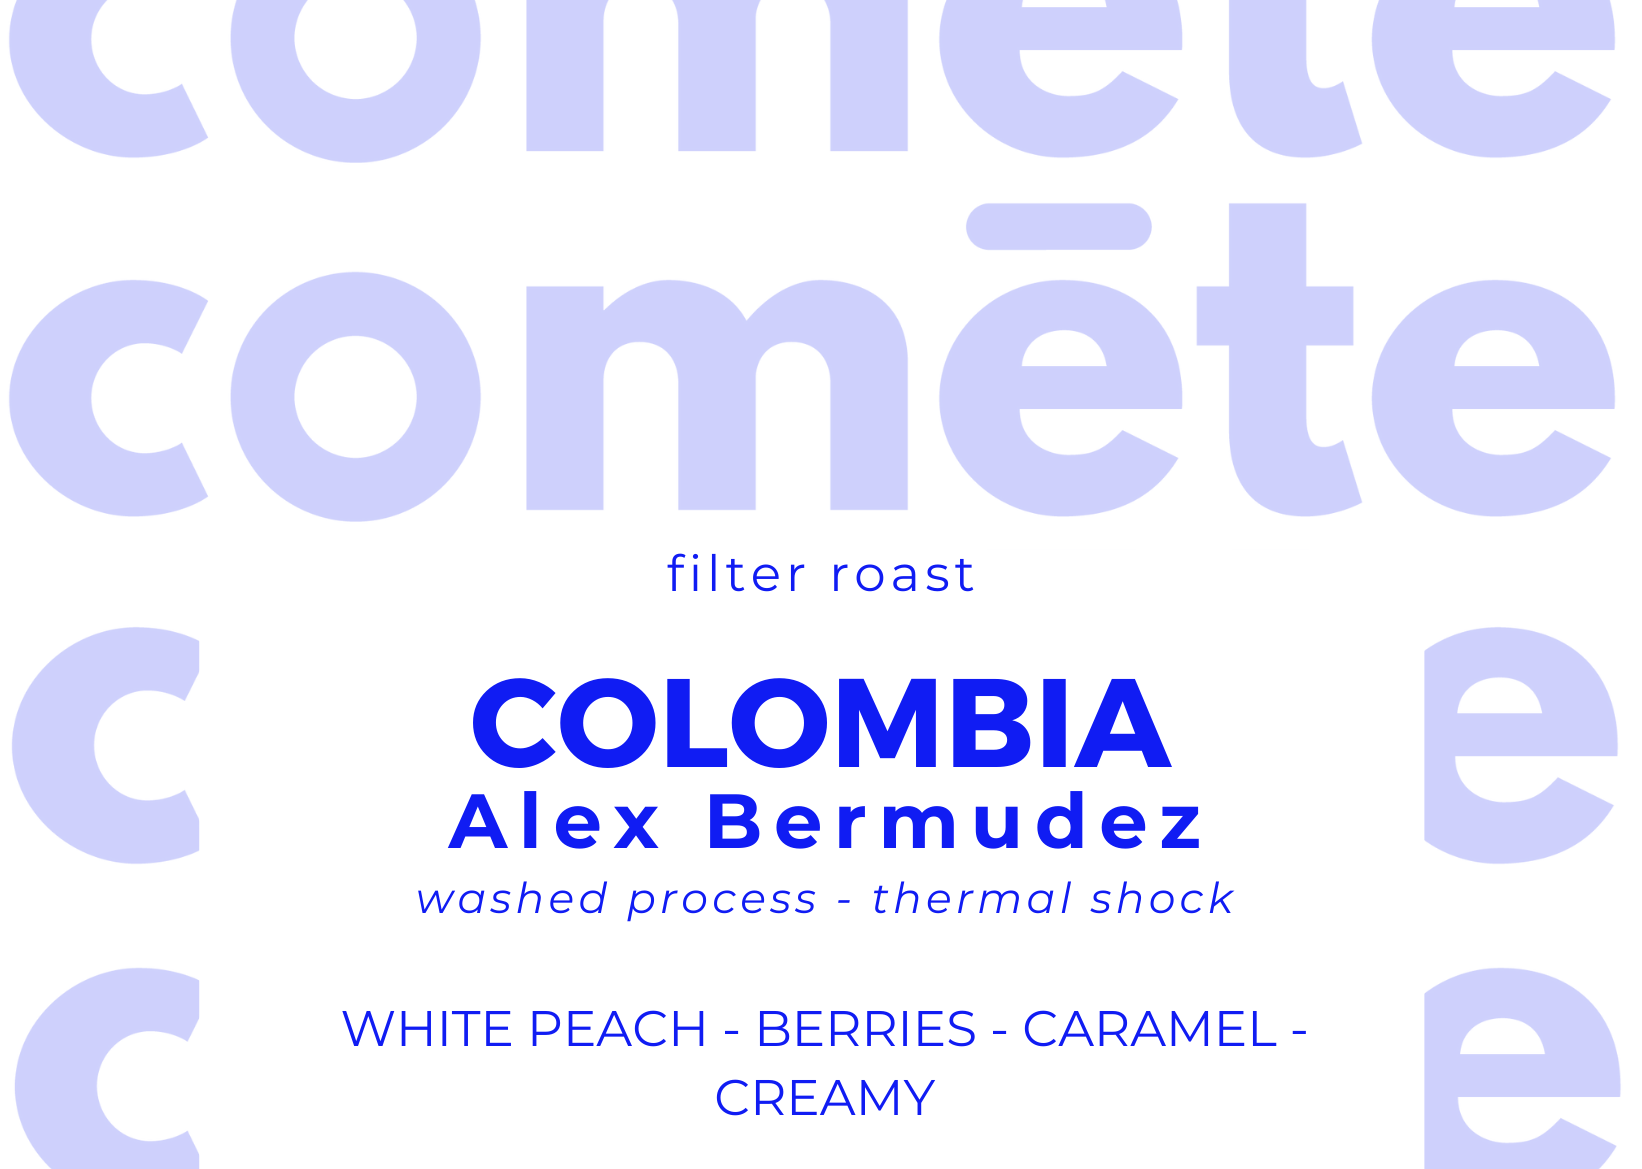 coffee beans from Colombia Alex Bermudez, washed thermal shock, white peach berries caramel creamy